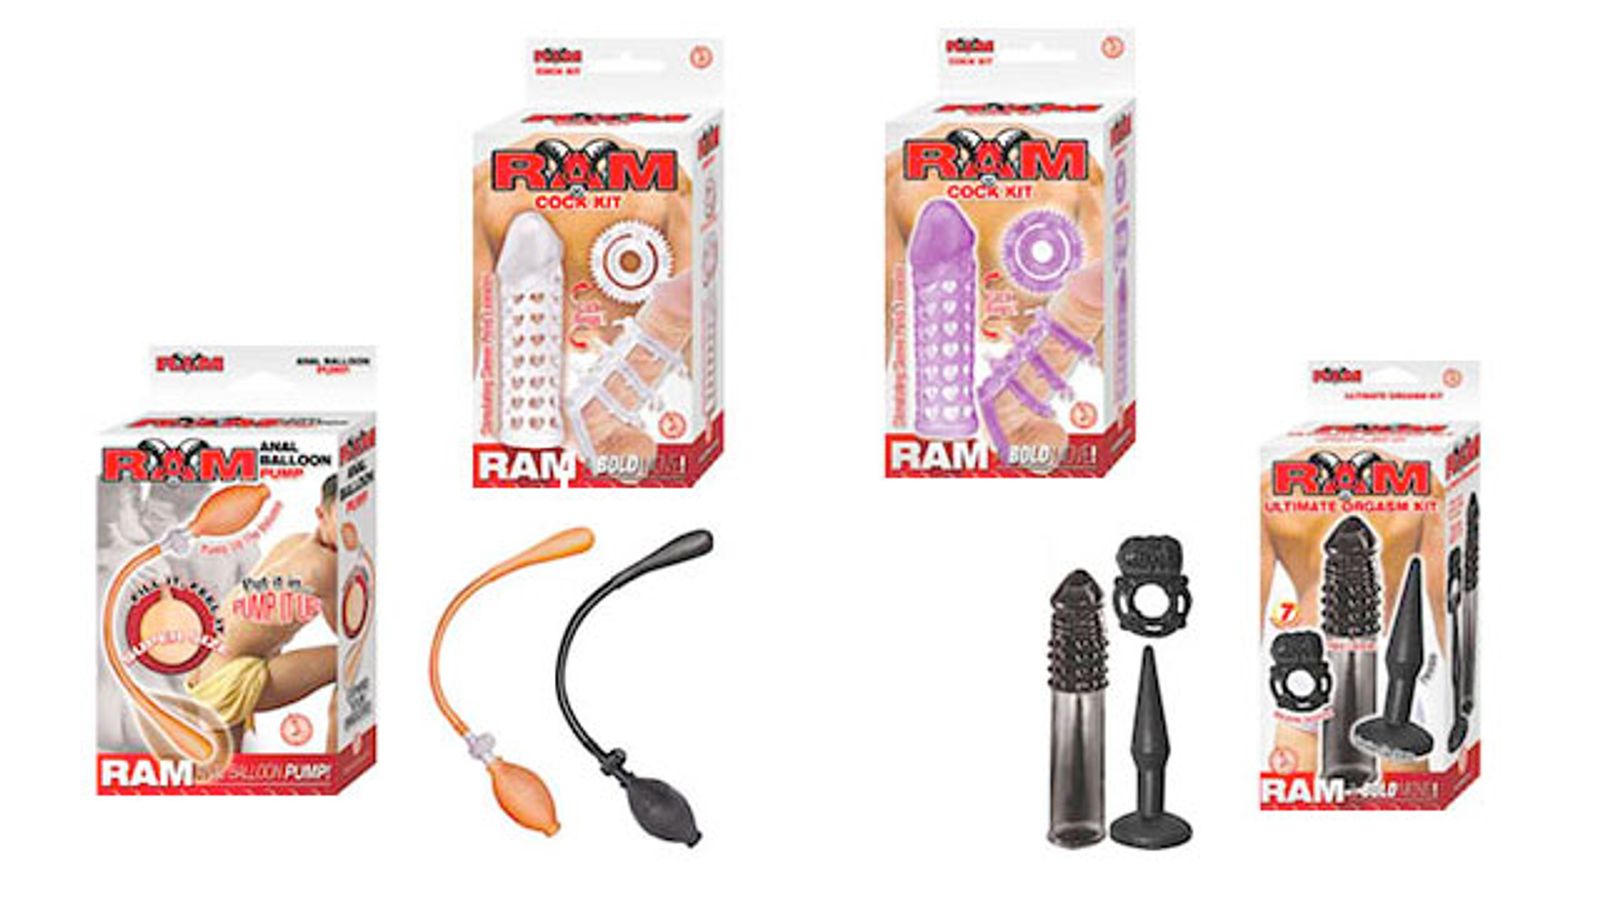 Nasstoys Adds New Items to Ram Collection